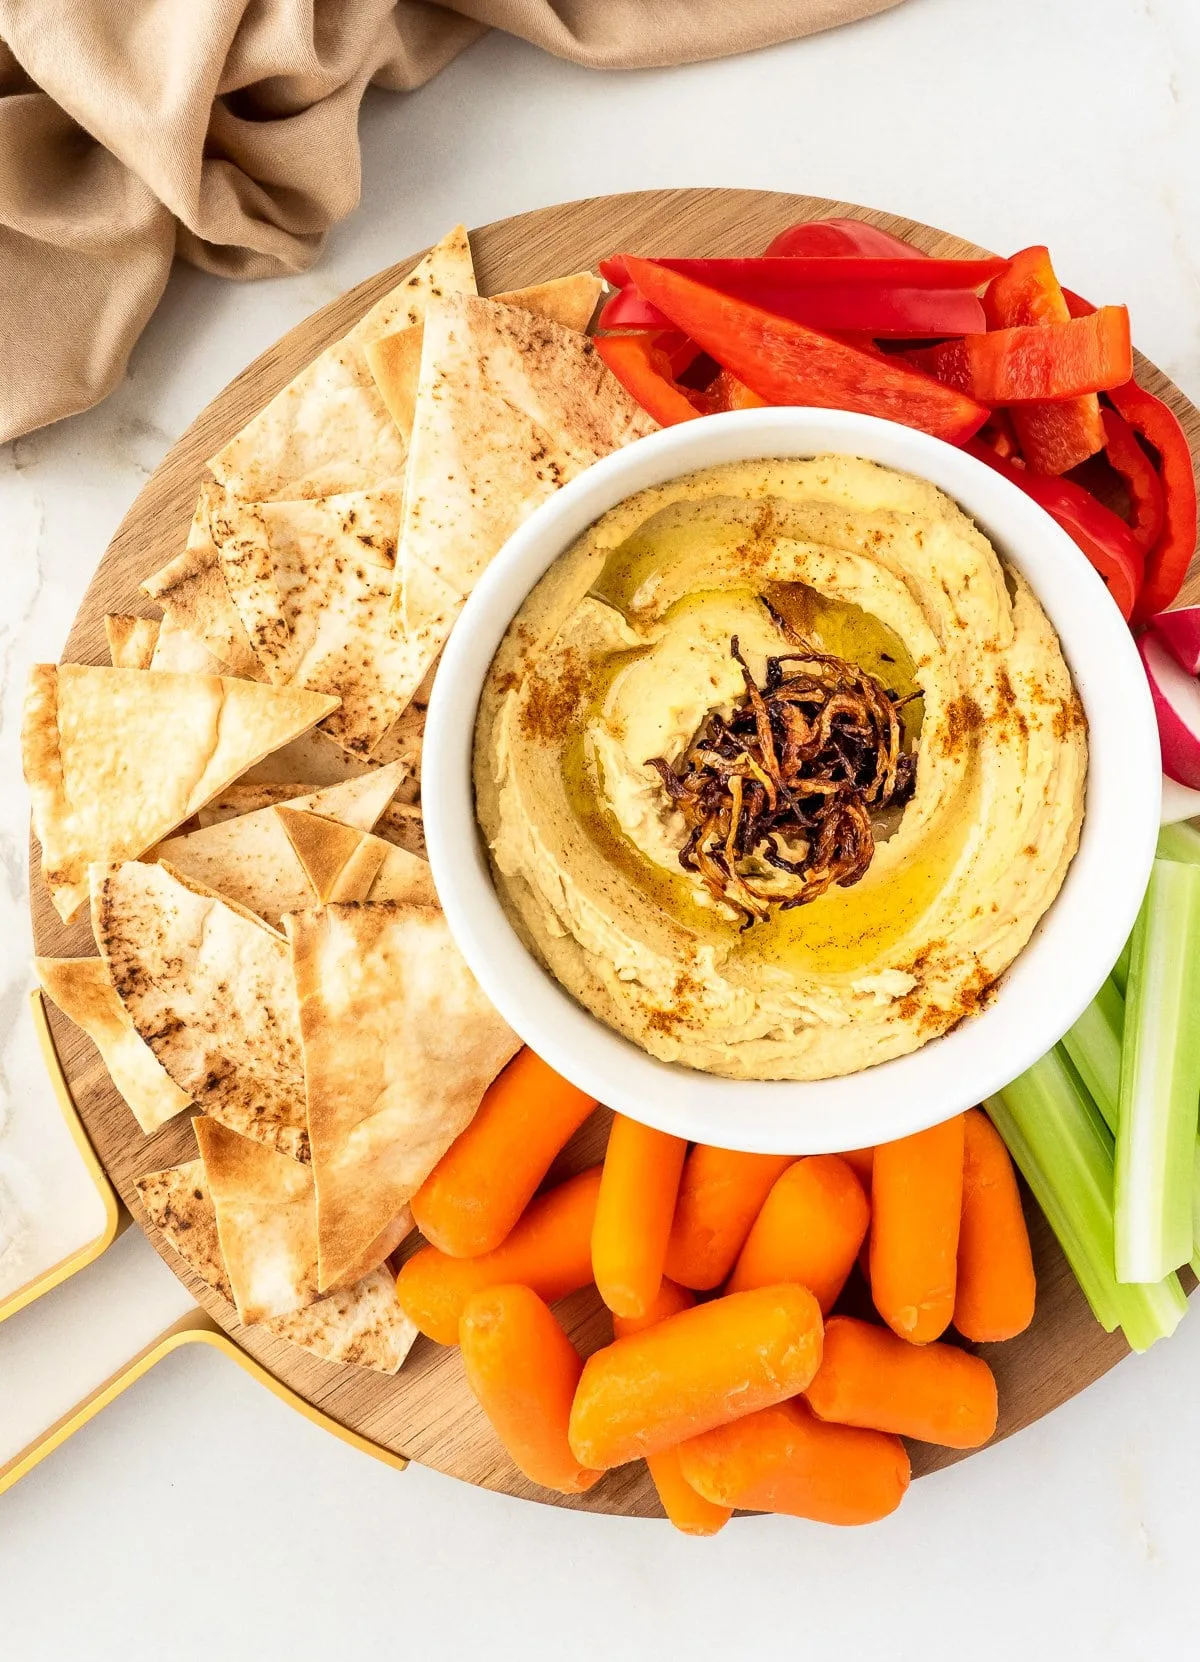 Plate of hummus with pita chips and fresh vegetables.